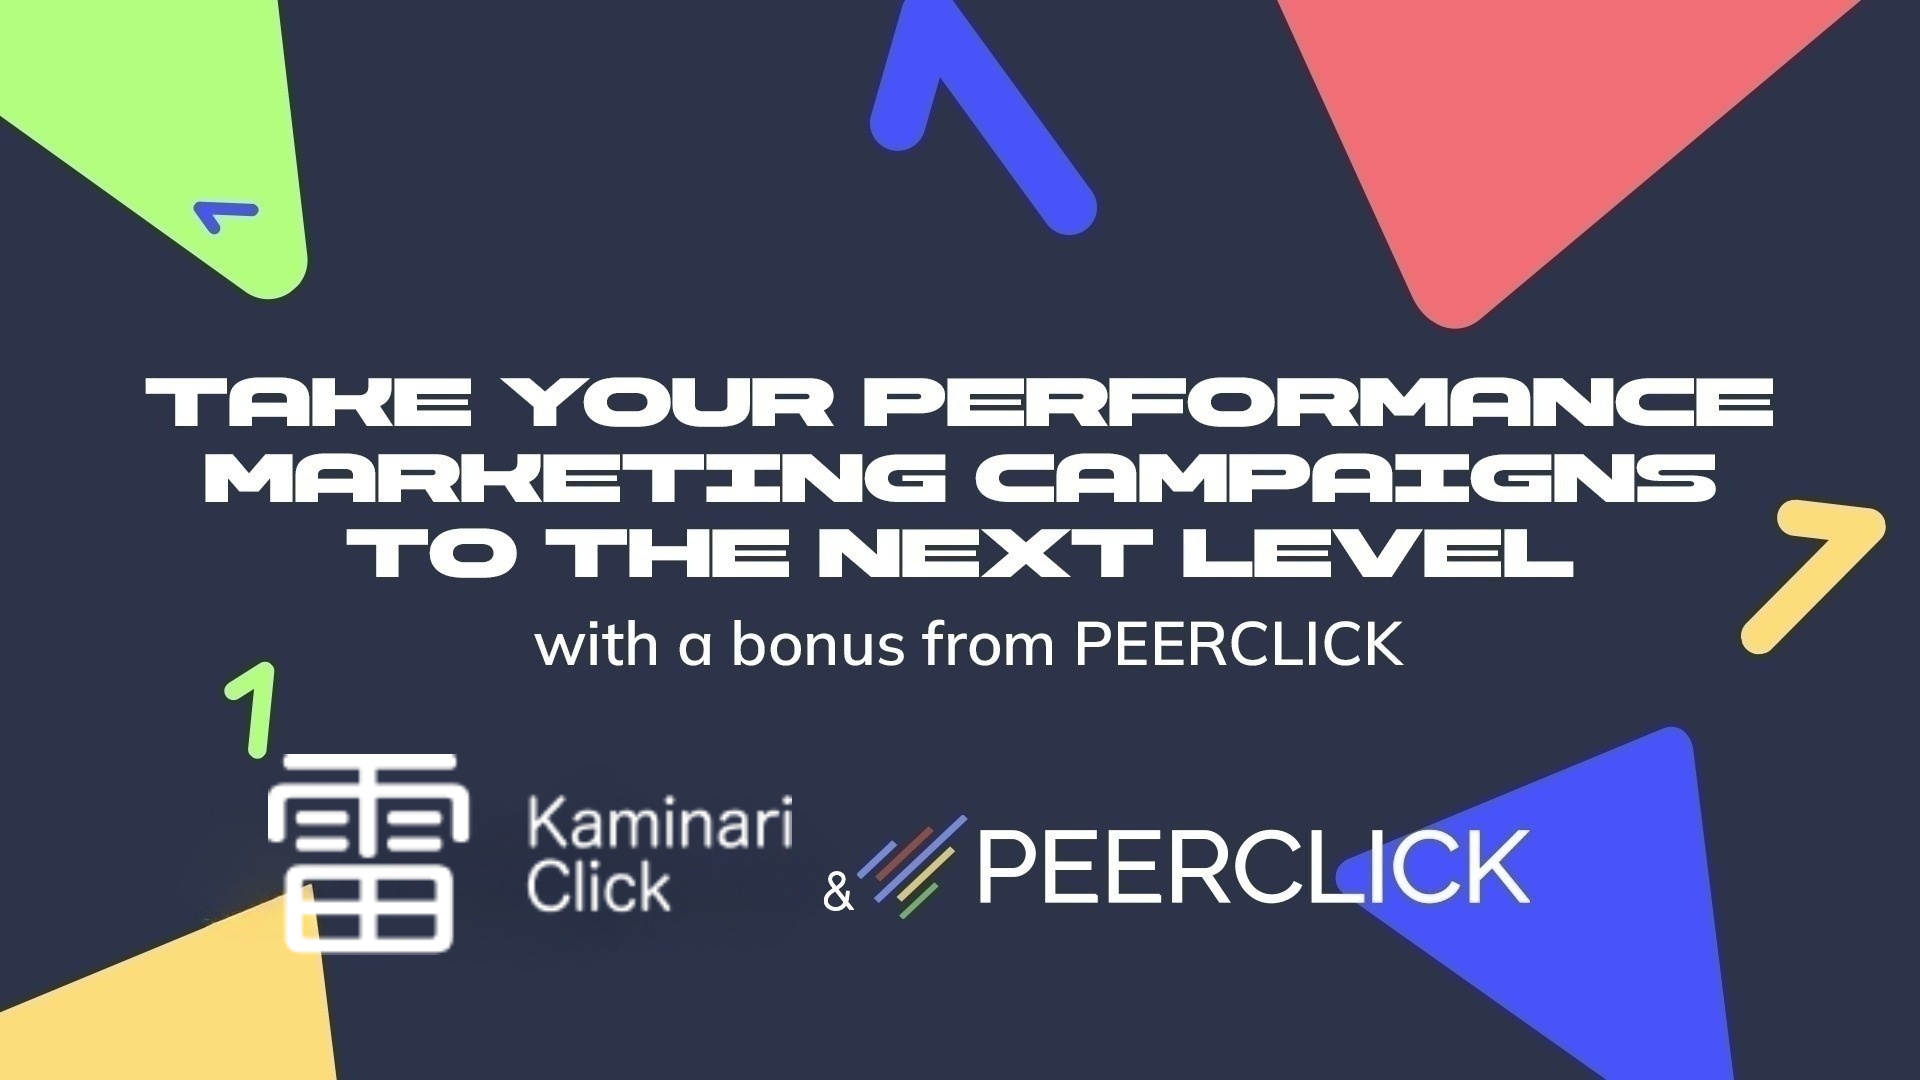 Get PeerClick's Basic+ Plan FREE for a Month + Exclusive Cloaking Feature!